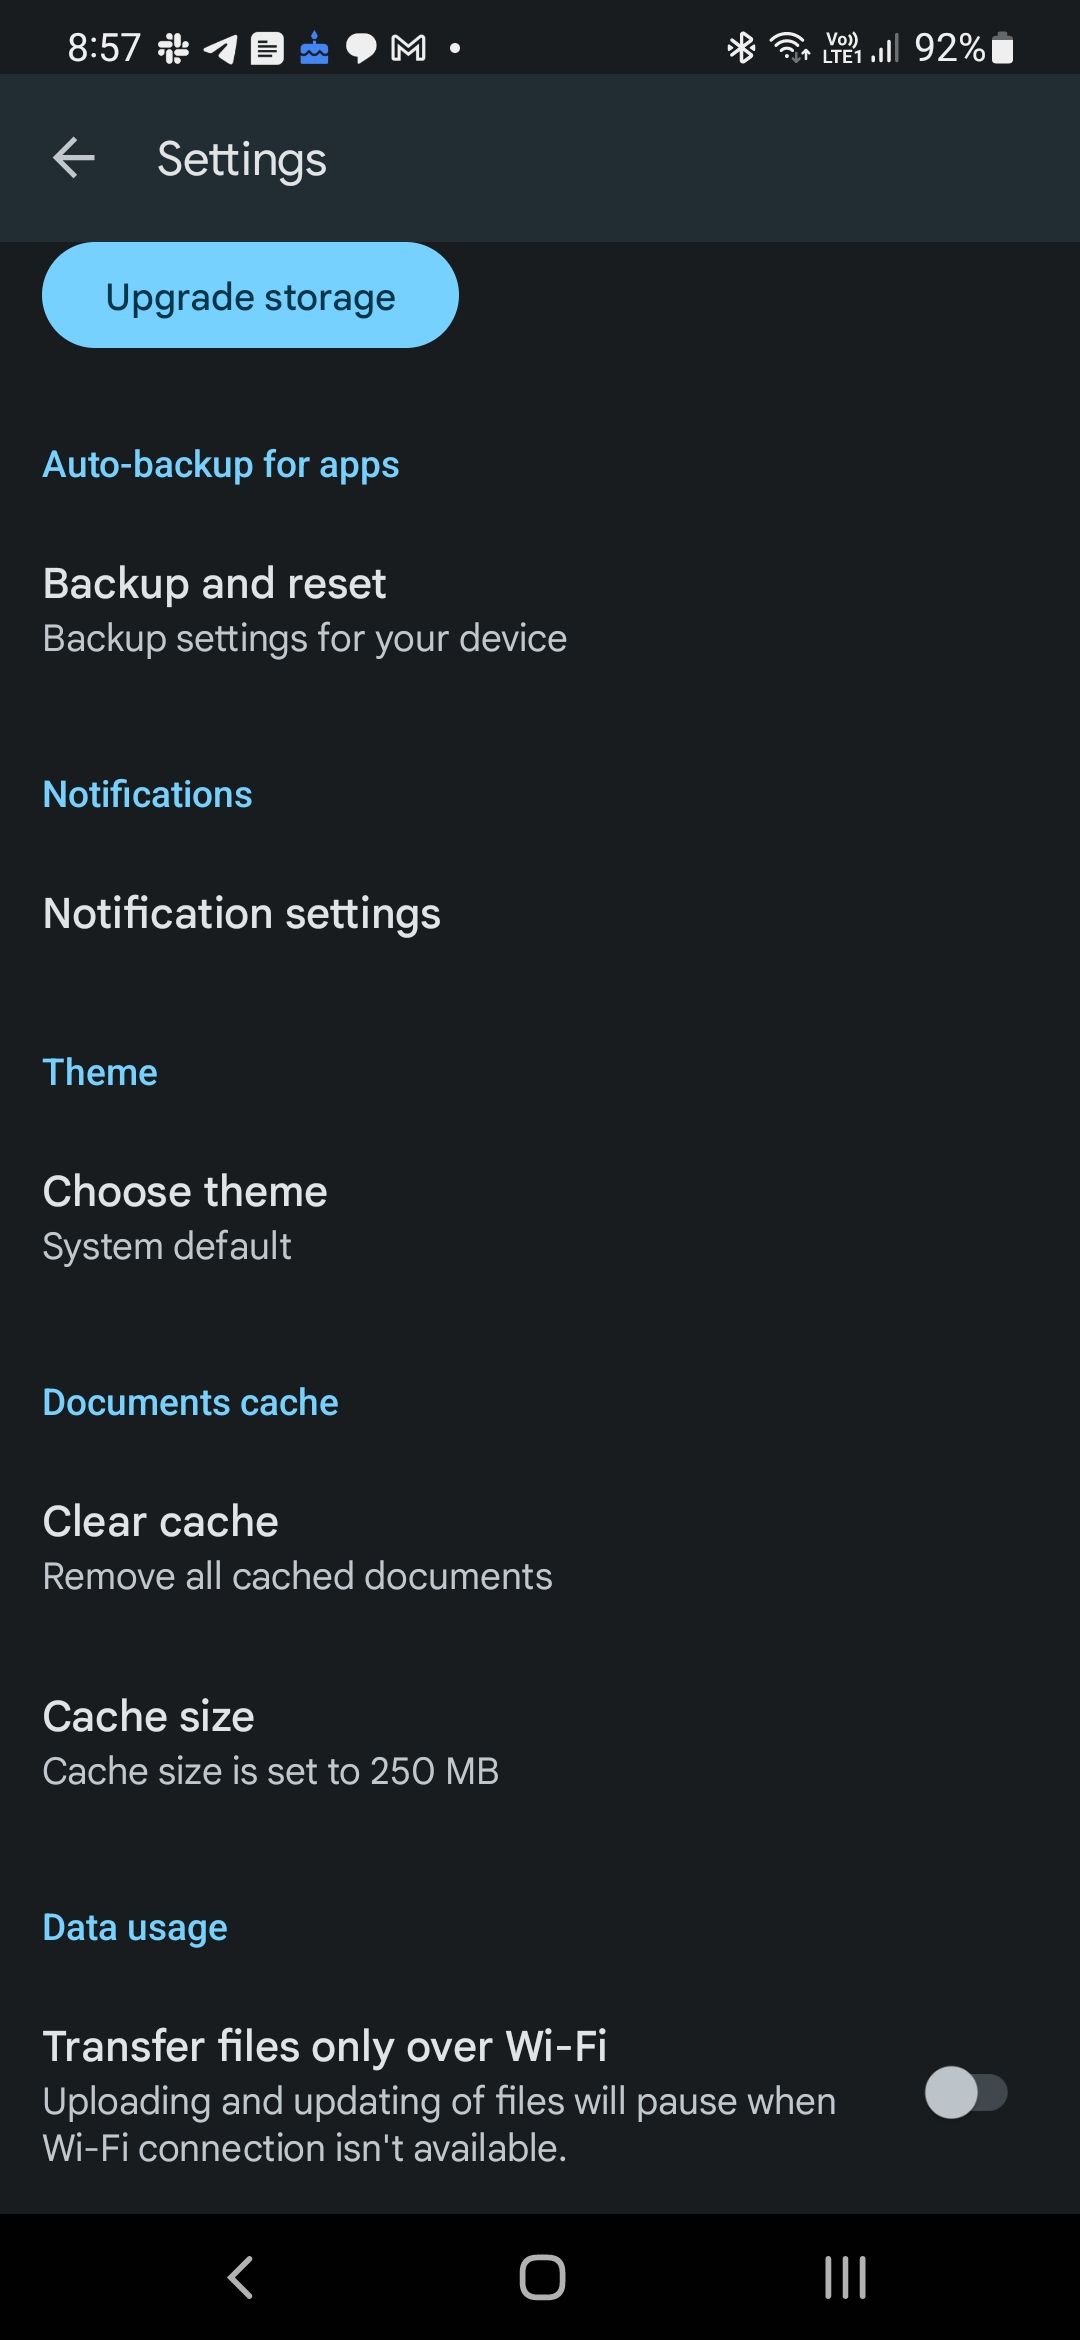 A screenshot of Google Drive settings on a mobile device, featuring options such as 'Upgrade storage', 'Auto-backup for apps', 'Backup and reset', and 'Notification settings'. 'Theme' is set to 'System default', and 'Documents cache' includes a 'Clear cache' function. 'Data usage' shows a disabled toggle for 'Transfer files only over Wi-Fi'.